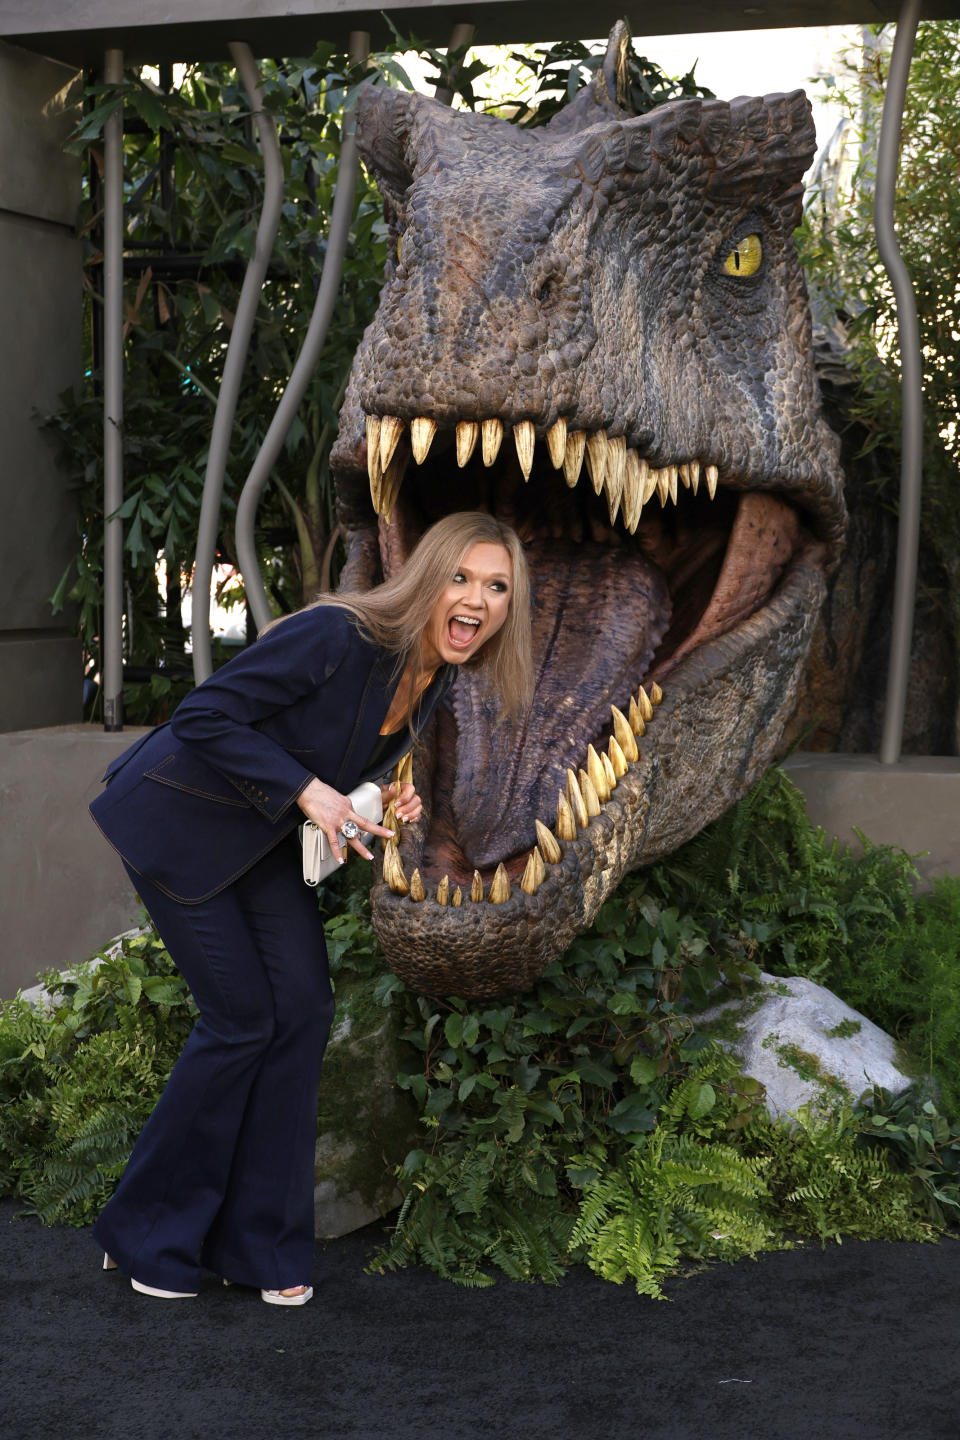 her posing with her head inside t-rex's mouth